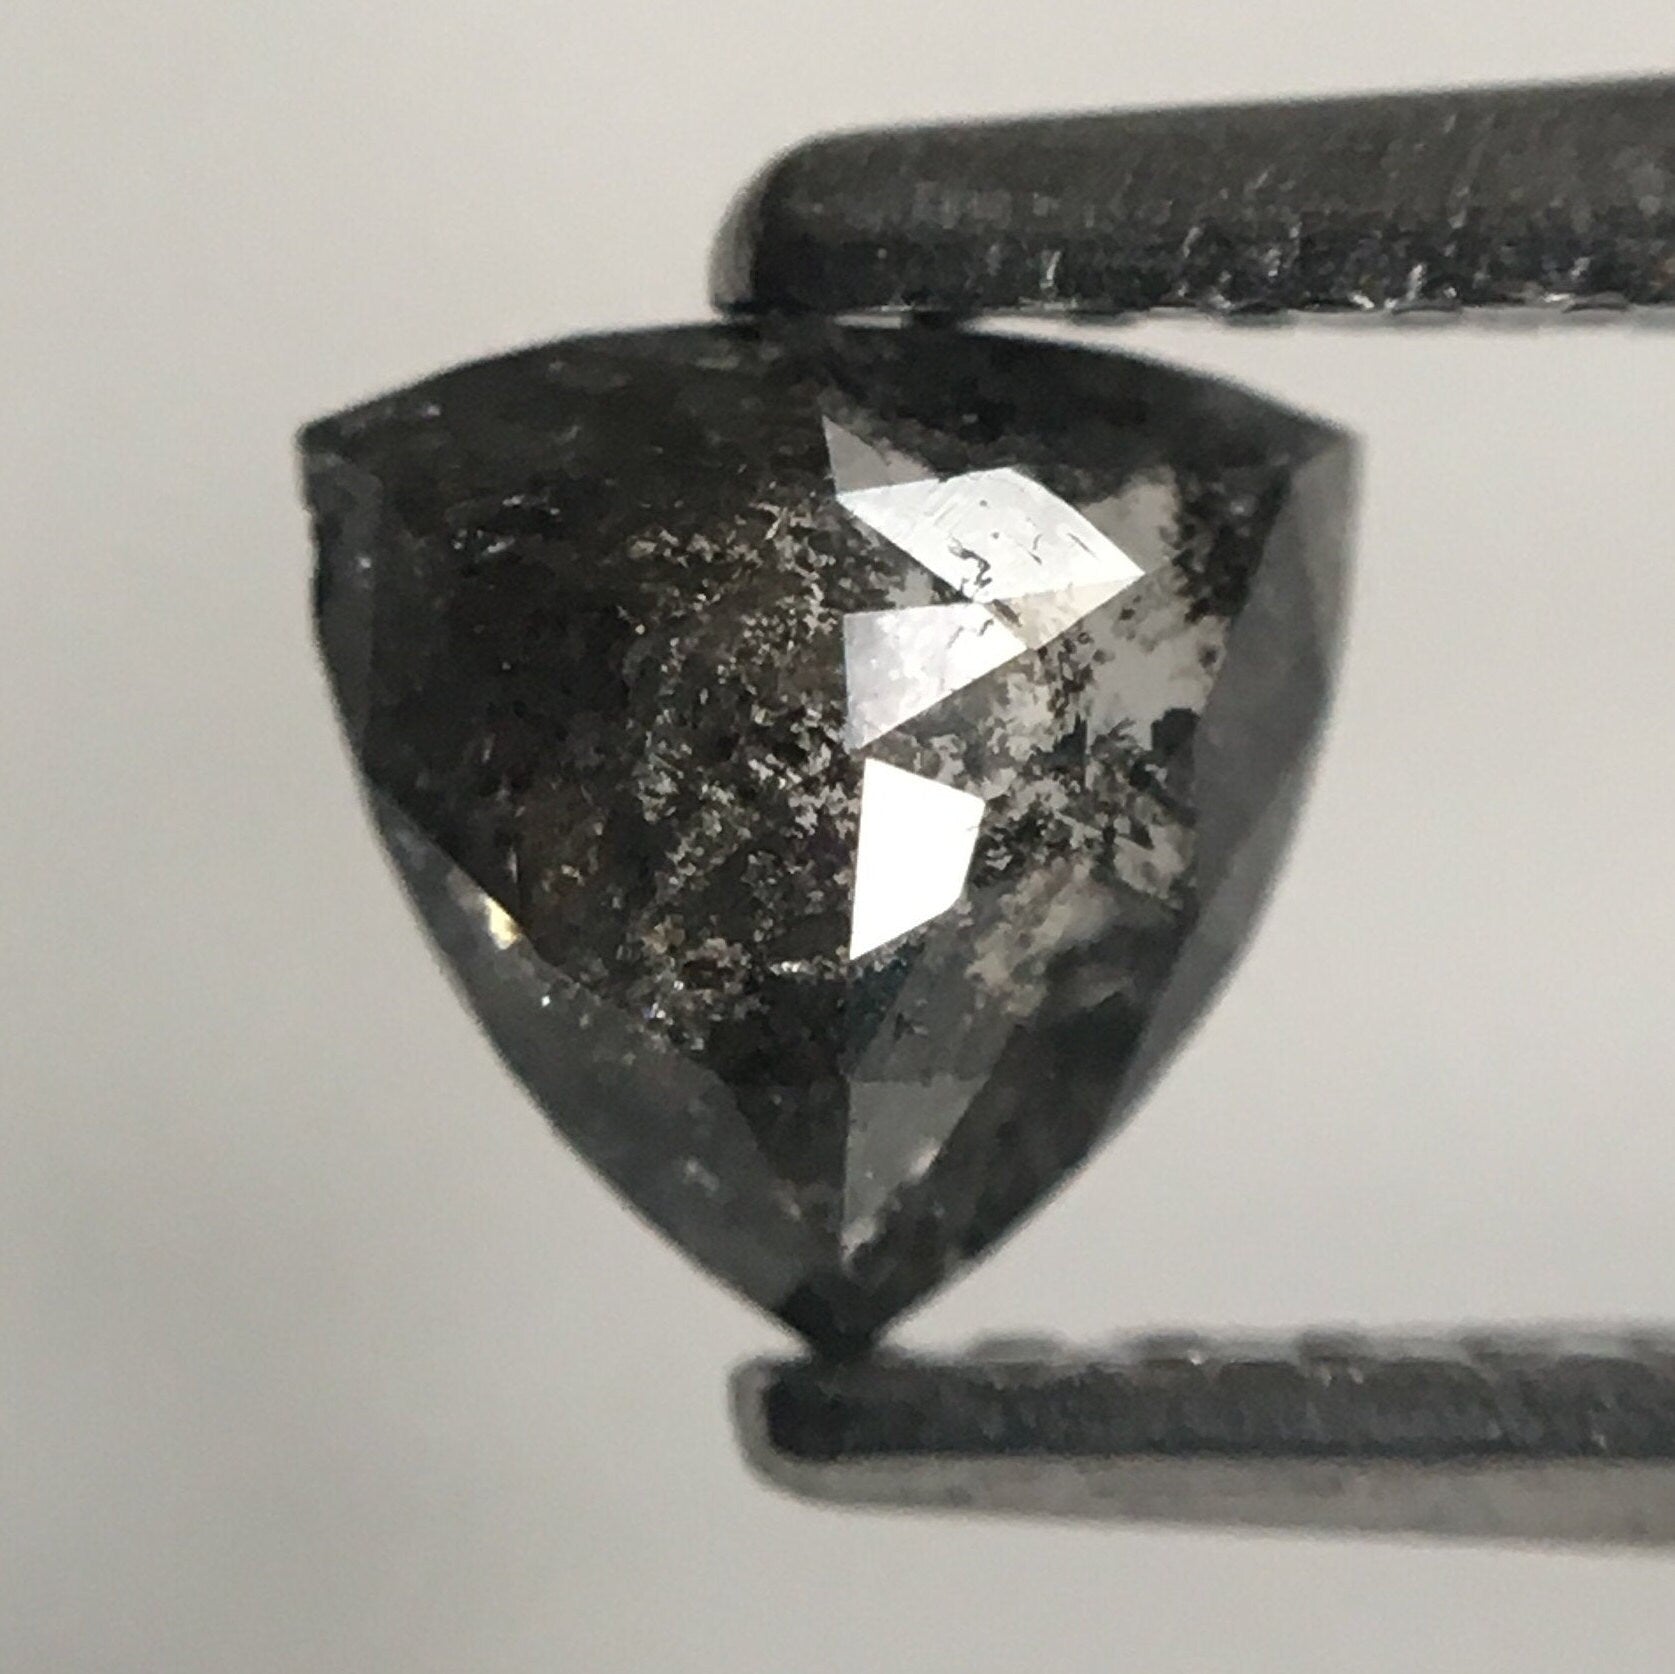 0.48 Ct Triangle Shape Natural Loose Diamond Dark Gray Color 5.21 mm x 5.34 mm X 2.29 mm, Polished Diamond for rings SJ43/16